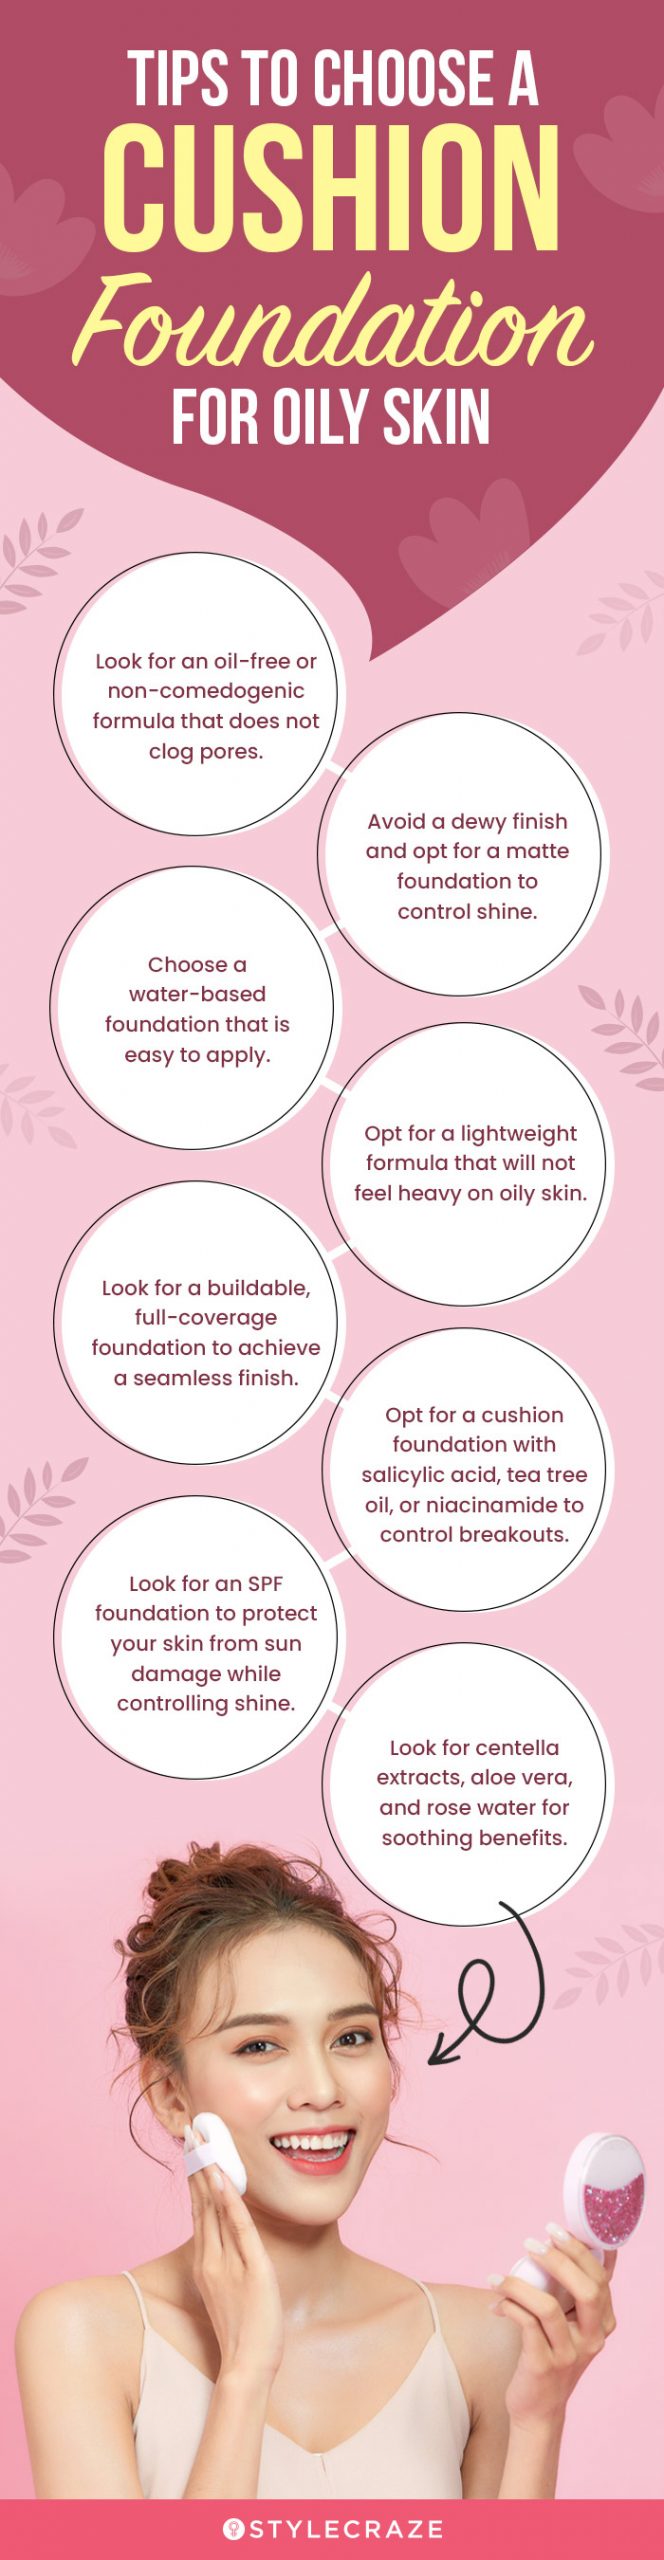 Tips To Choose A Cushion Foundation For Oily Skin (infographic)